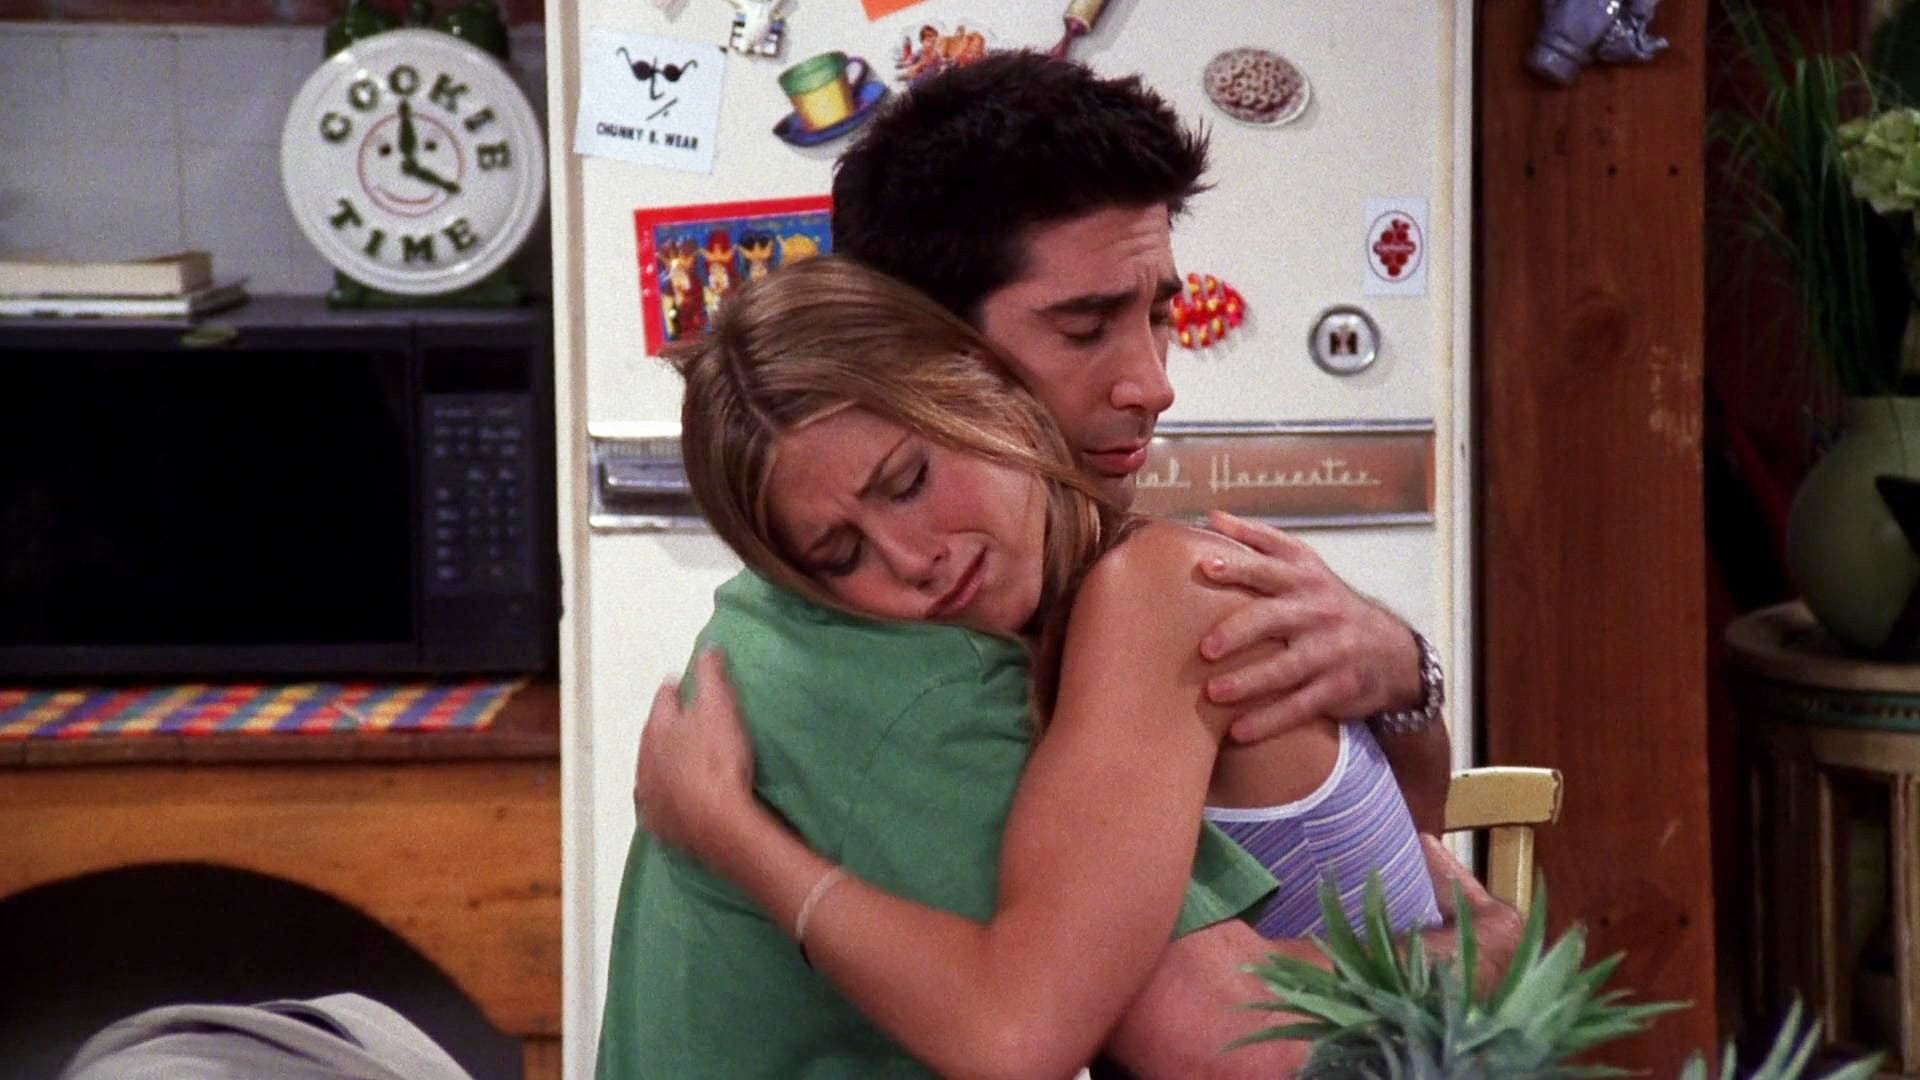 Friends - Ross & Rachel Try To Get An Annulment animated gif